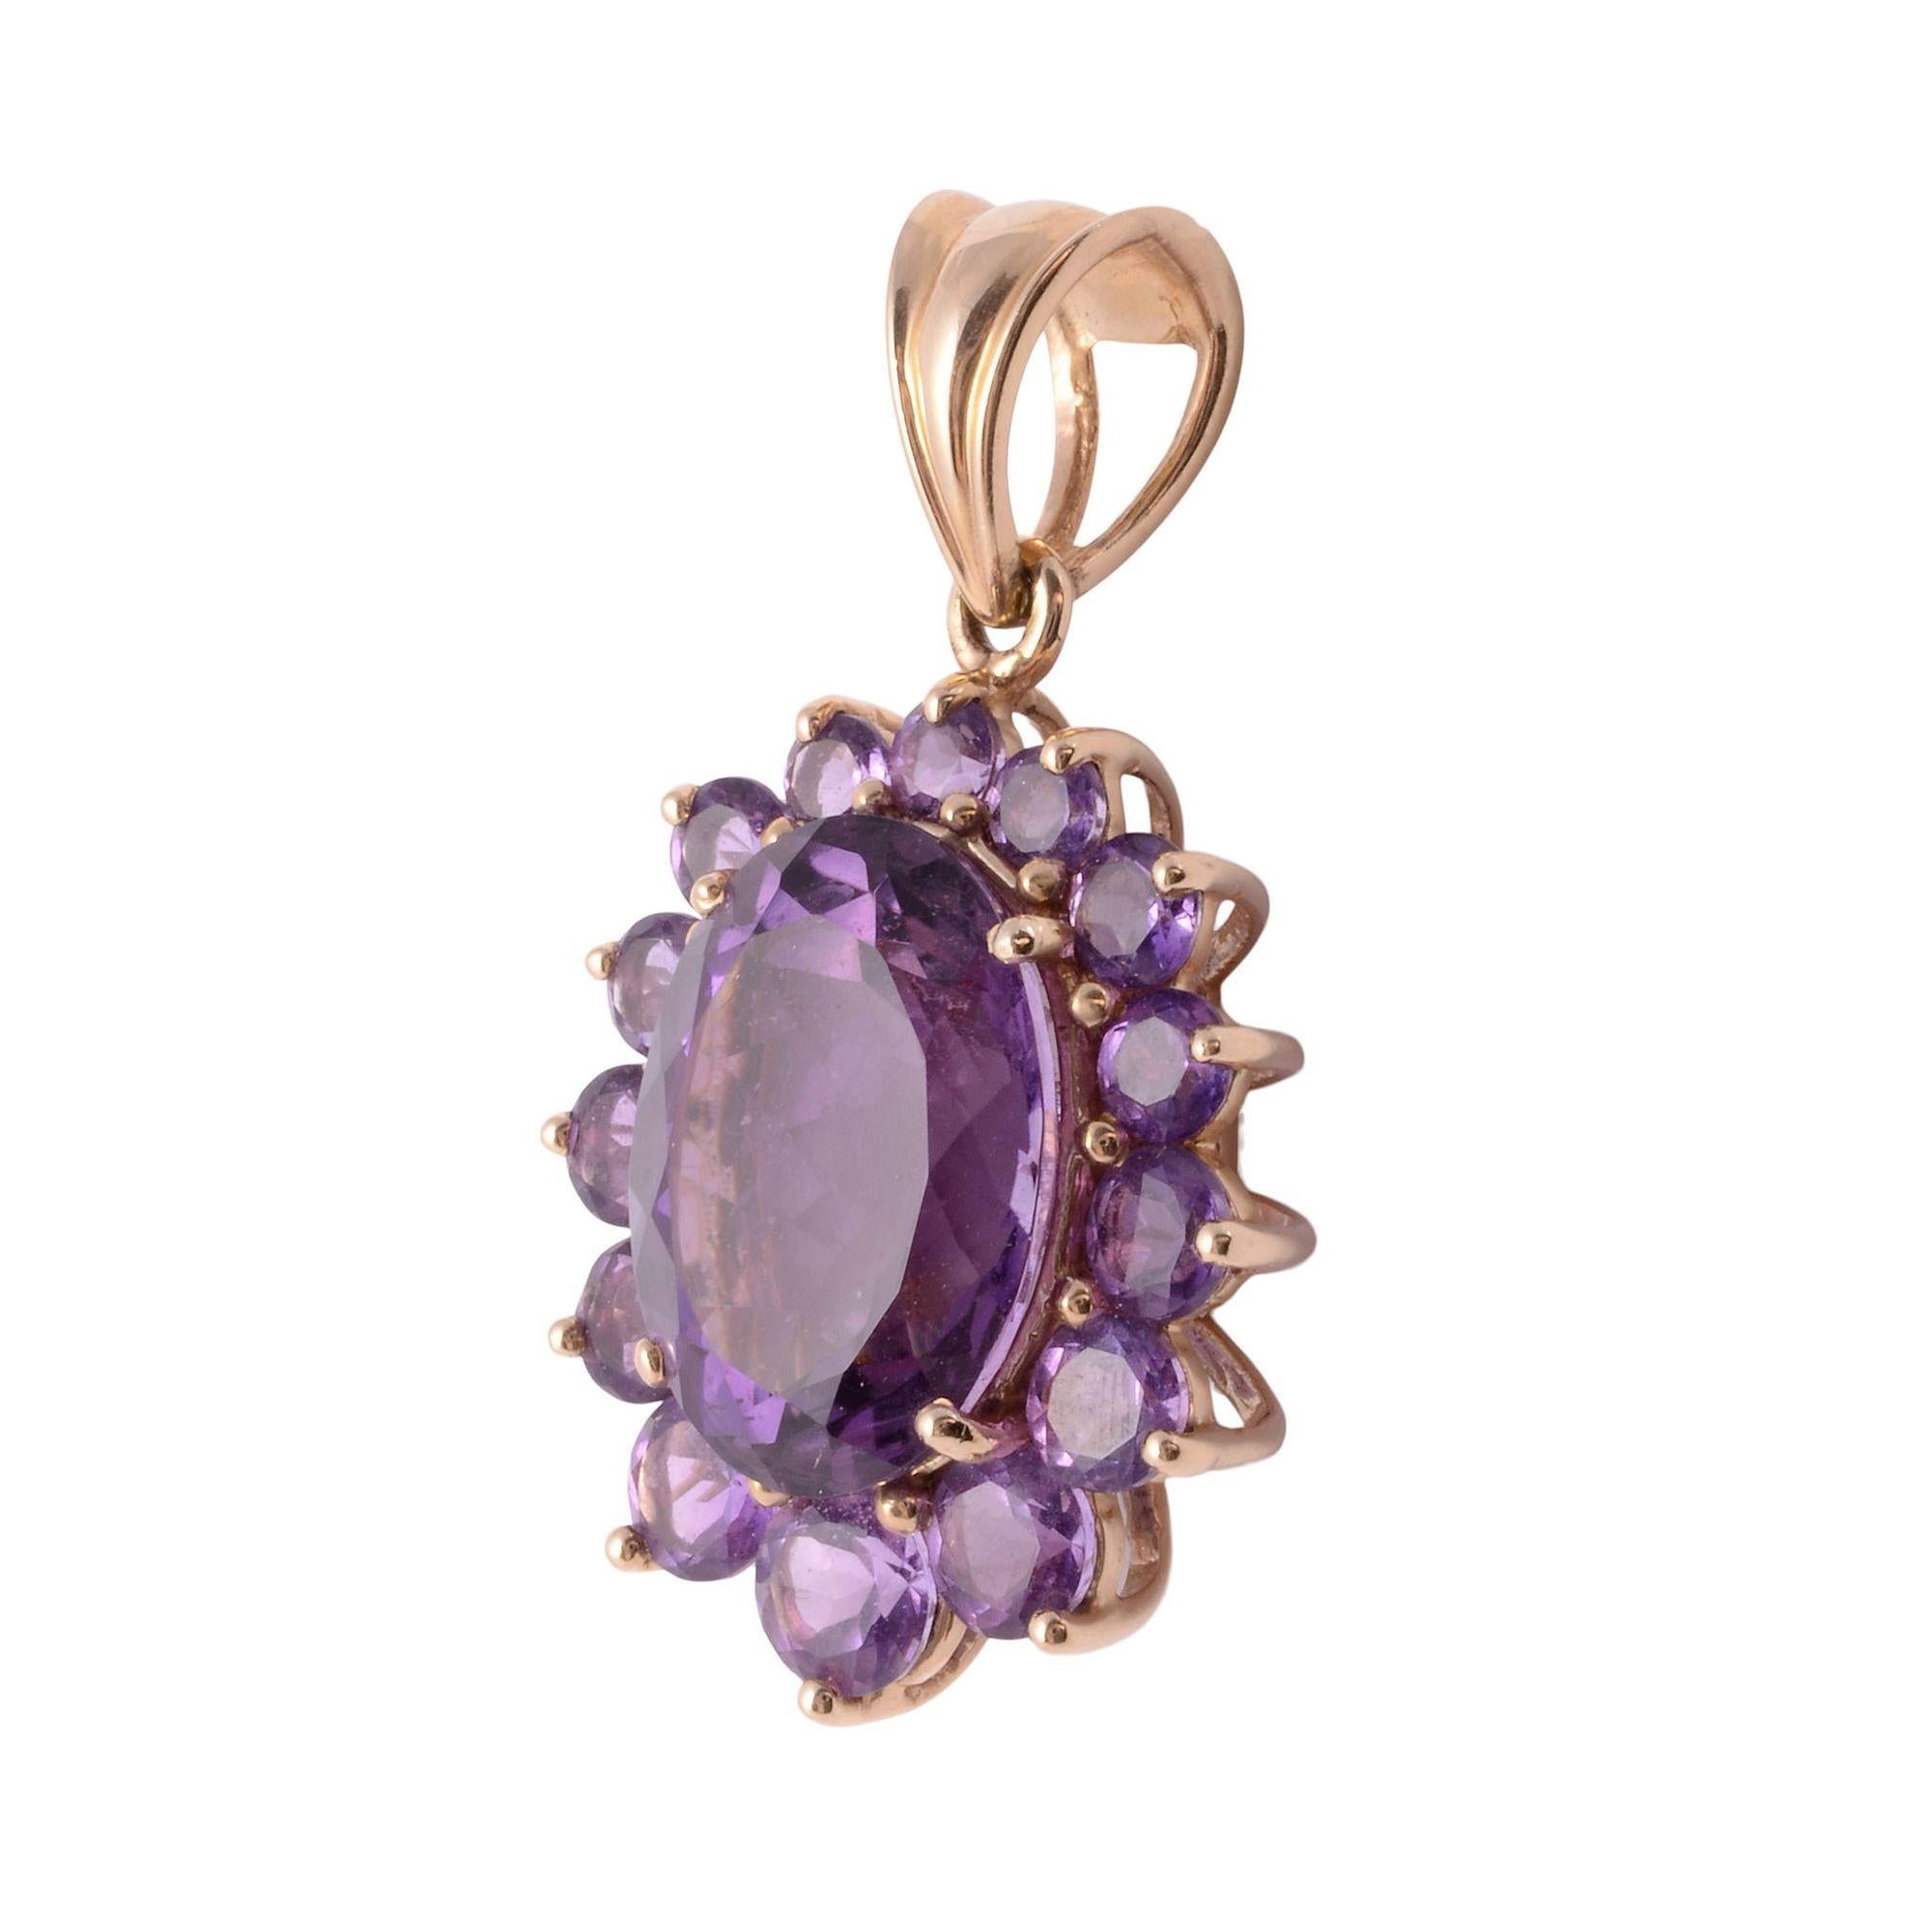 Estate oval amethyst pendant with amethyst surround. This 14 karat yellow gold pendant features a 9.0 carat center oval amethyst that is encircled with 2.30 CTW of round amethysts. [KIMH 537]

Dimensions
35.6mm H (including bale) x 20.5mm W